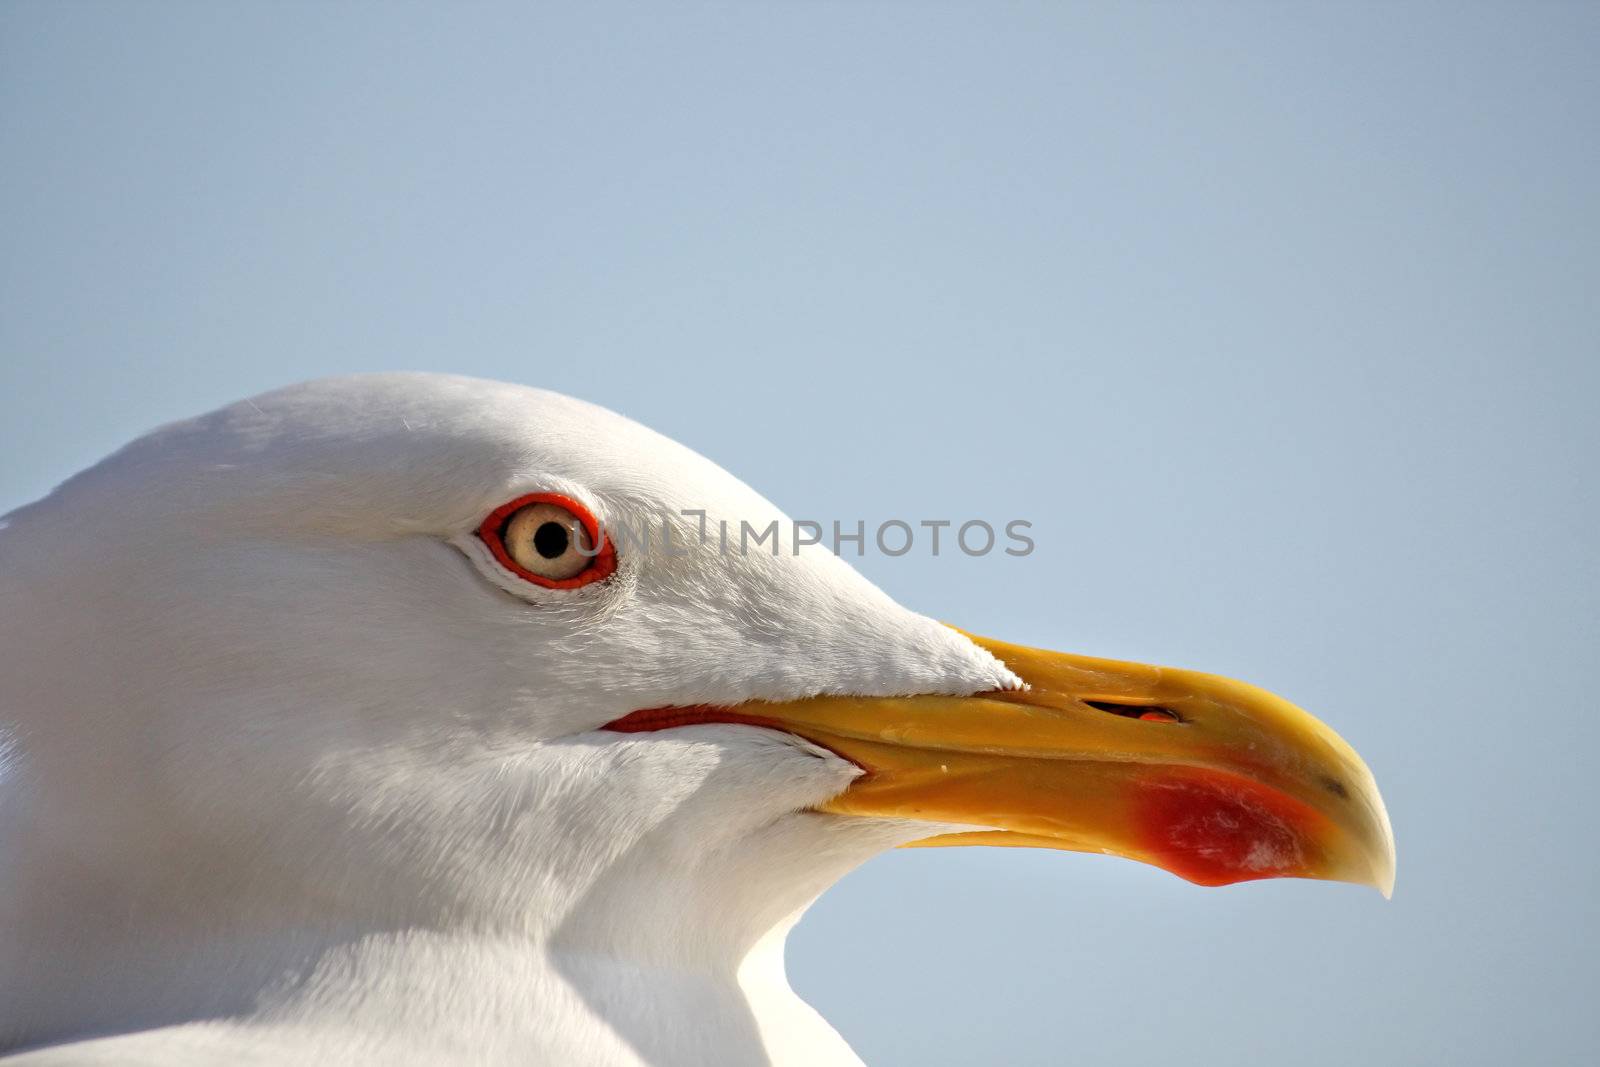 Close up view of the head of a seagull bird.